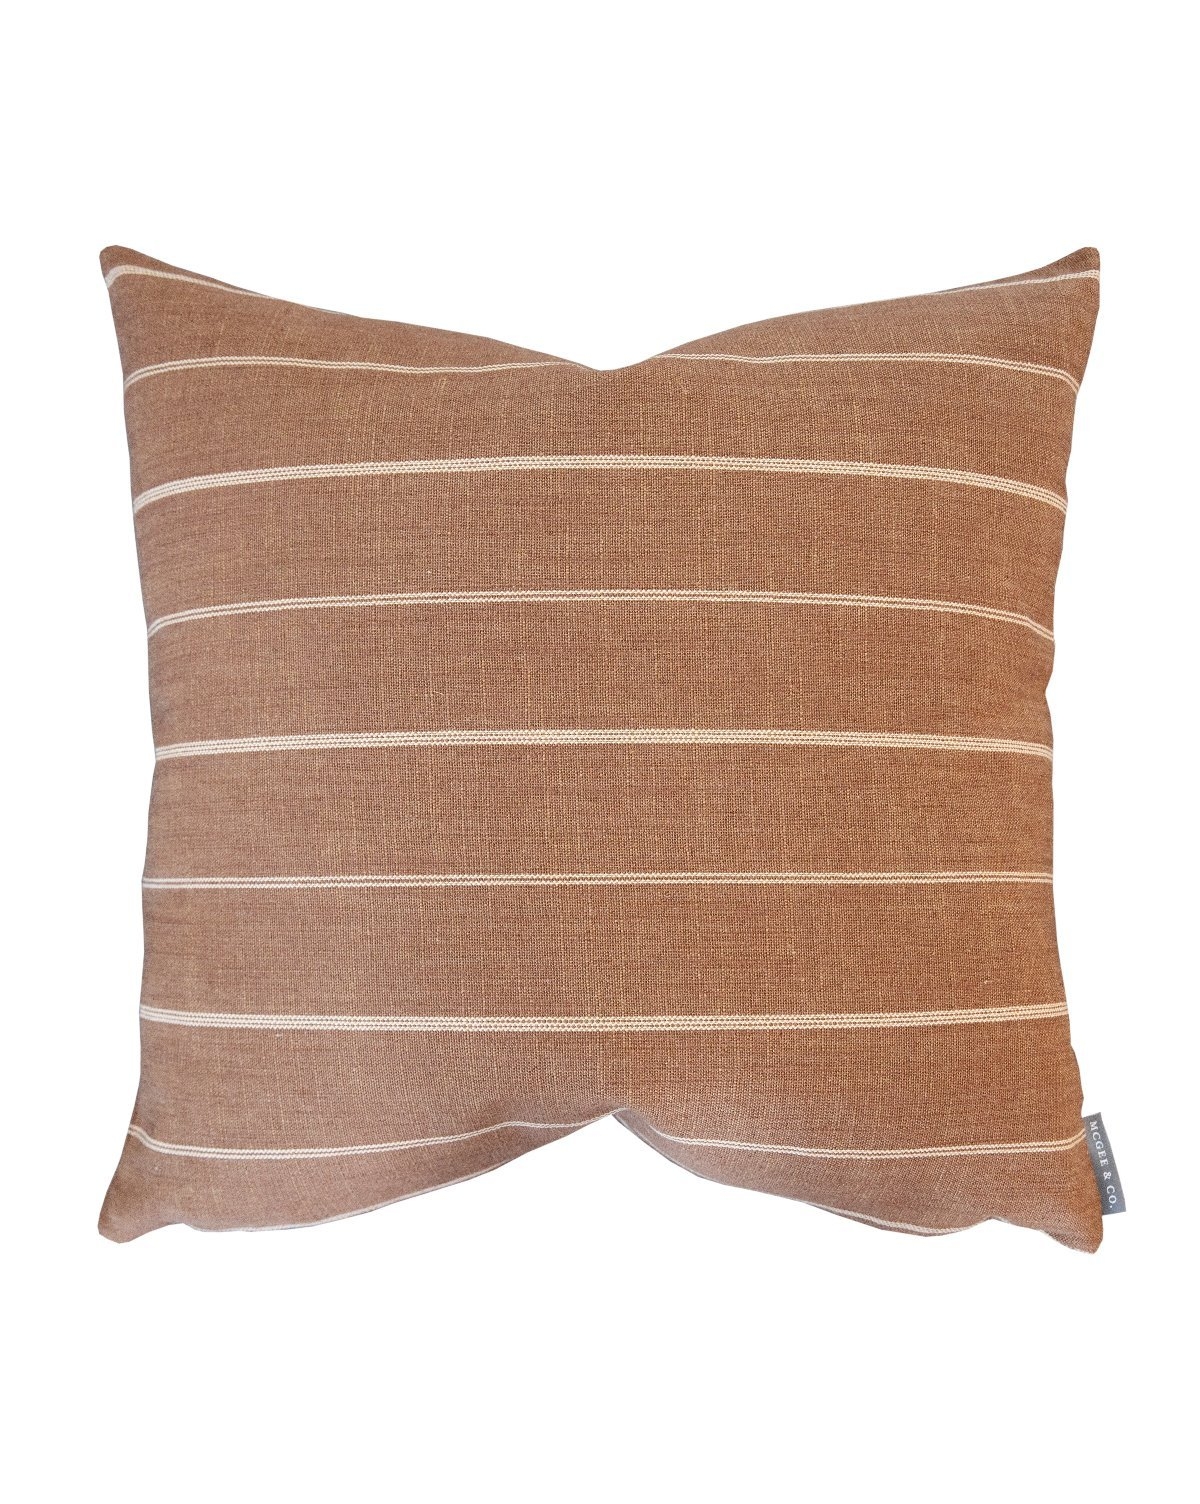 LEOPOLD PILLOW WITHOUT INSERT, 20" x 20" - Image 0